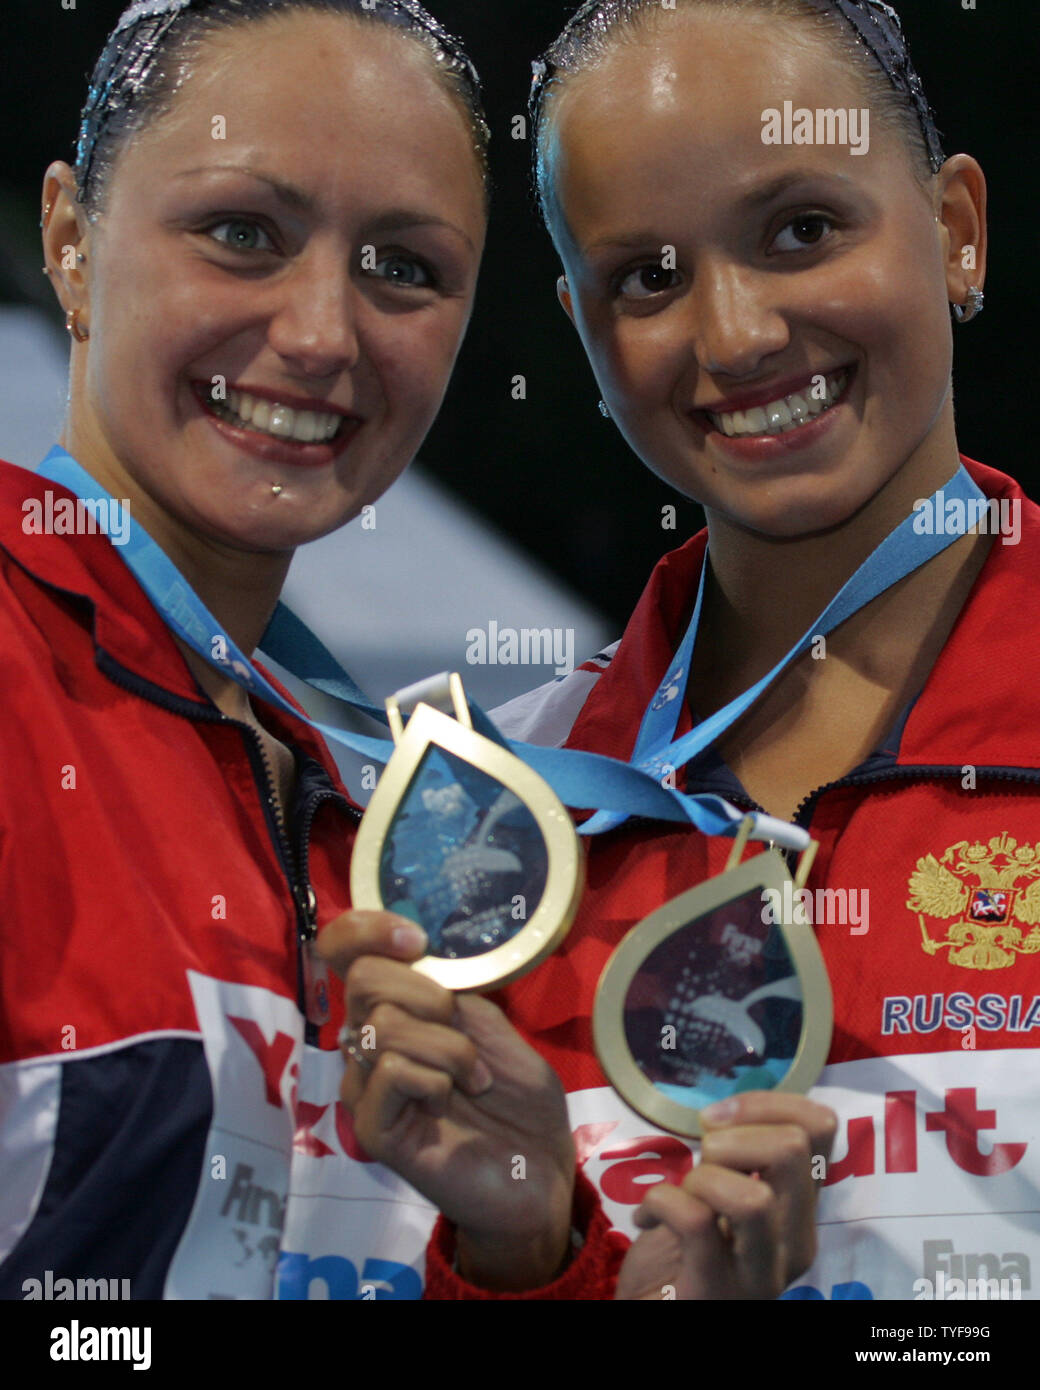 Russian synchronized swimmers Anastasia Davydova and Anastasia Ermakova brandish their gold medals from the duet competition at the XI FINA World Championships in Montreal, Canada on July 22, 2005.  The Anastasias dominated the competition earning six perfect 10.0 scores for a total of 99.667 points ahead of the Japanese and Spanish duets. (UPI Photo / Grace Chiu) Stock Photo